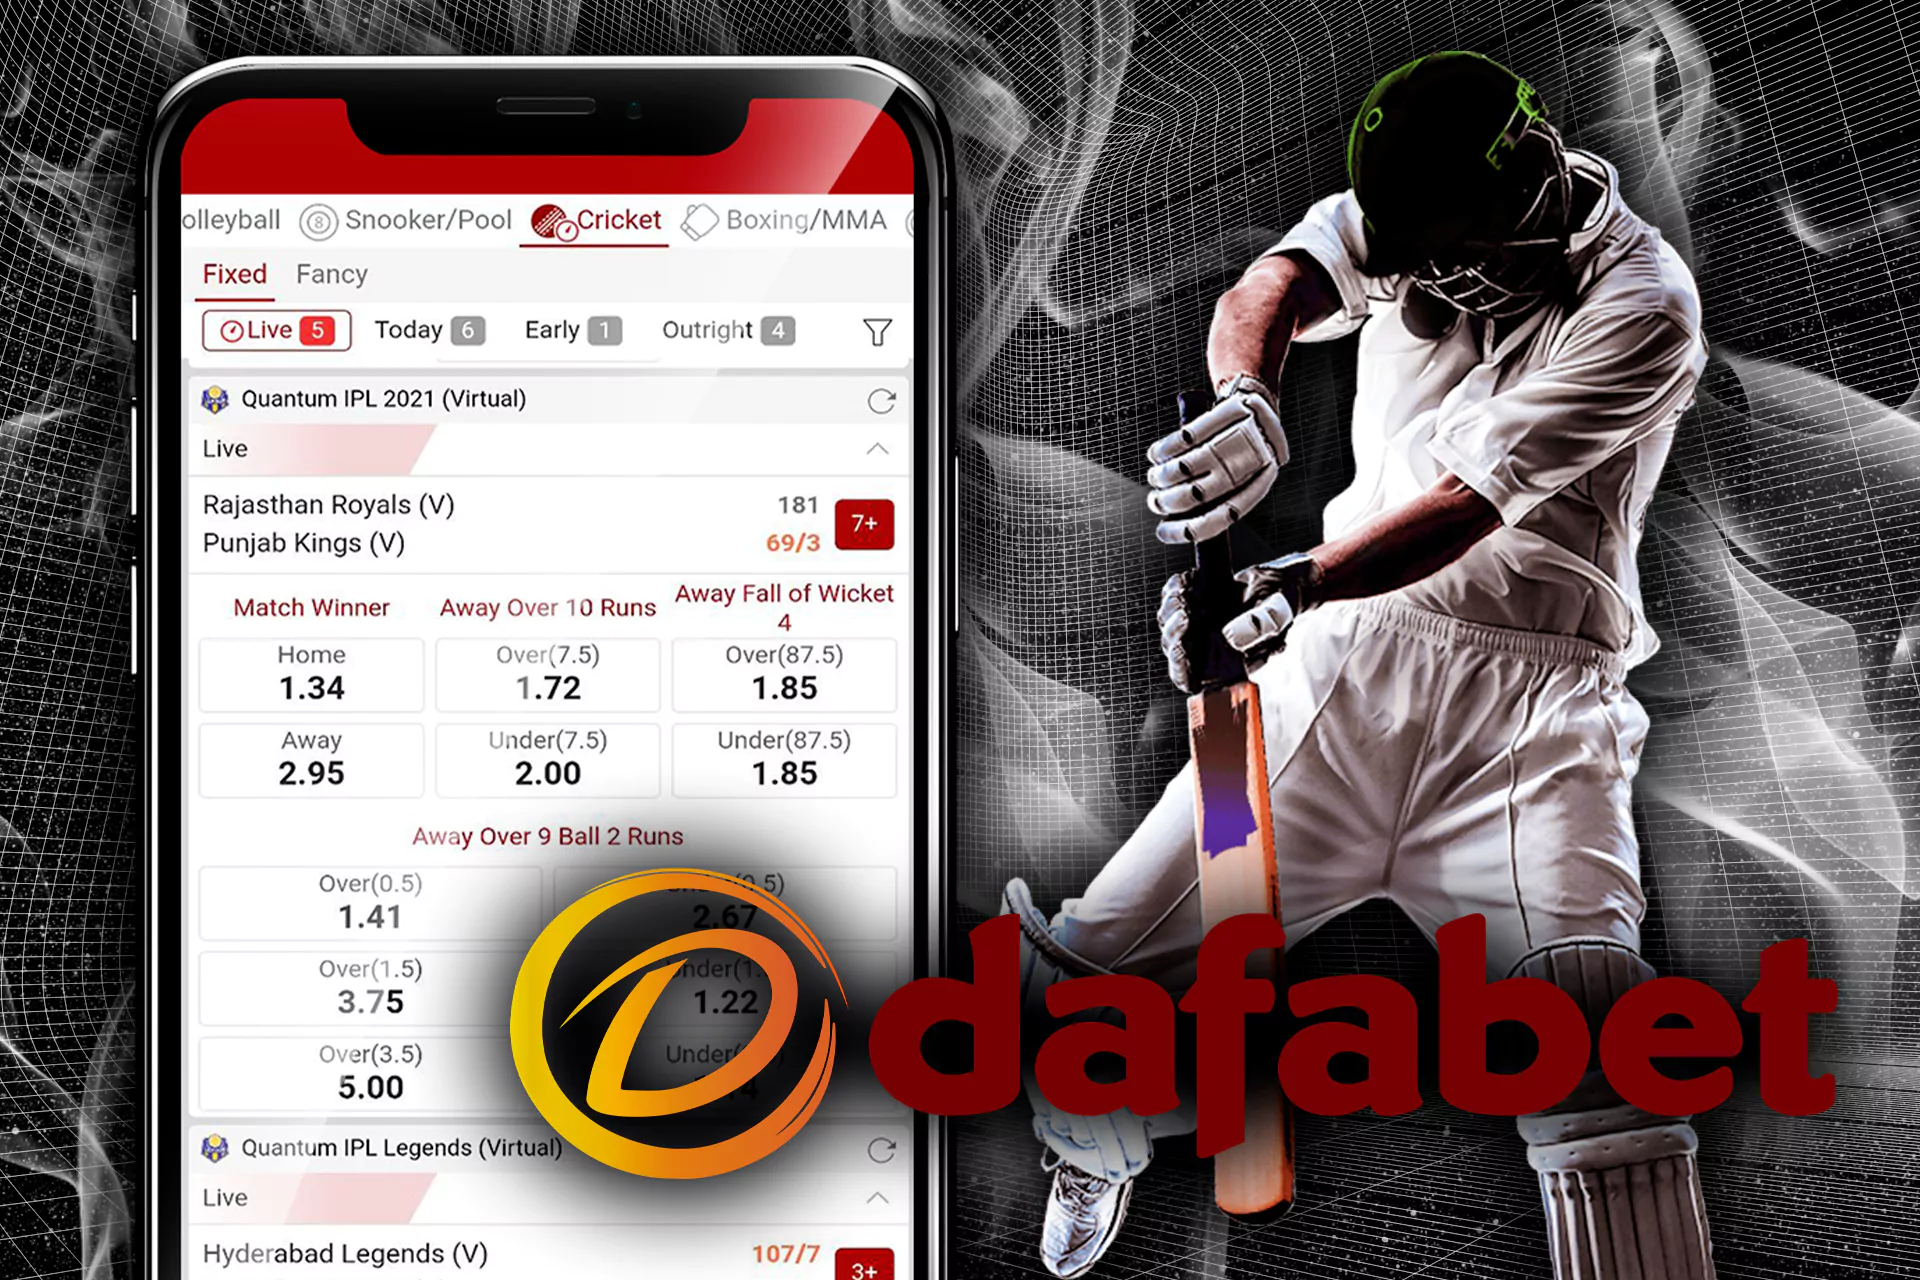 The Dafabet app environment is perfectly adapted for online betting for the Indian player.